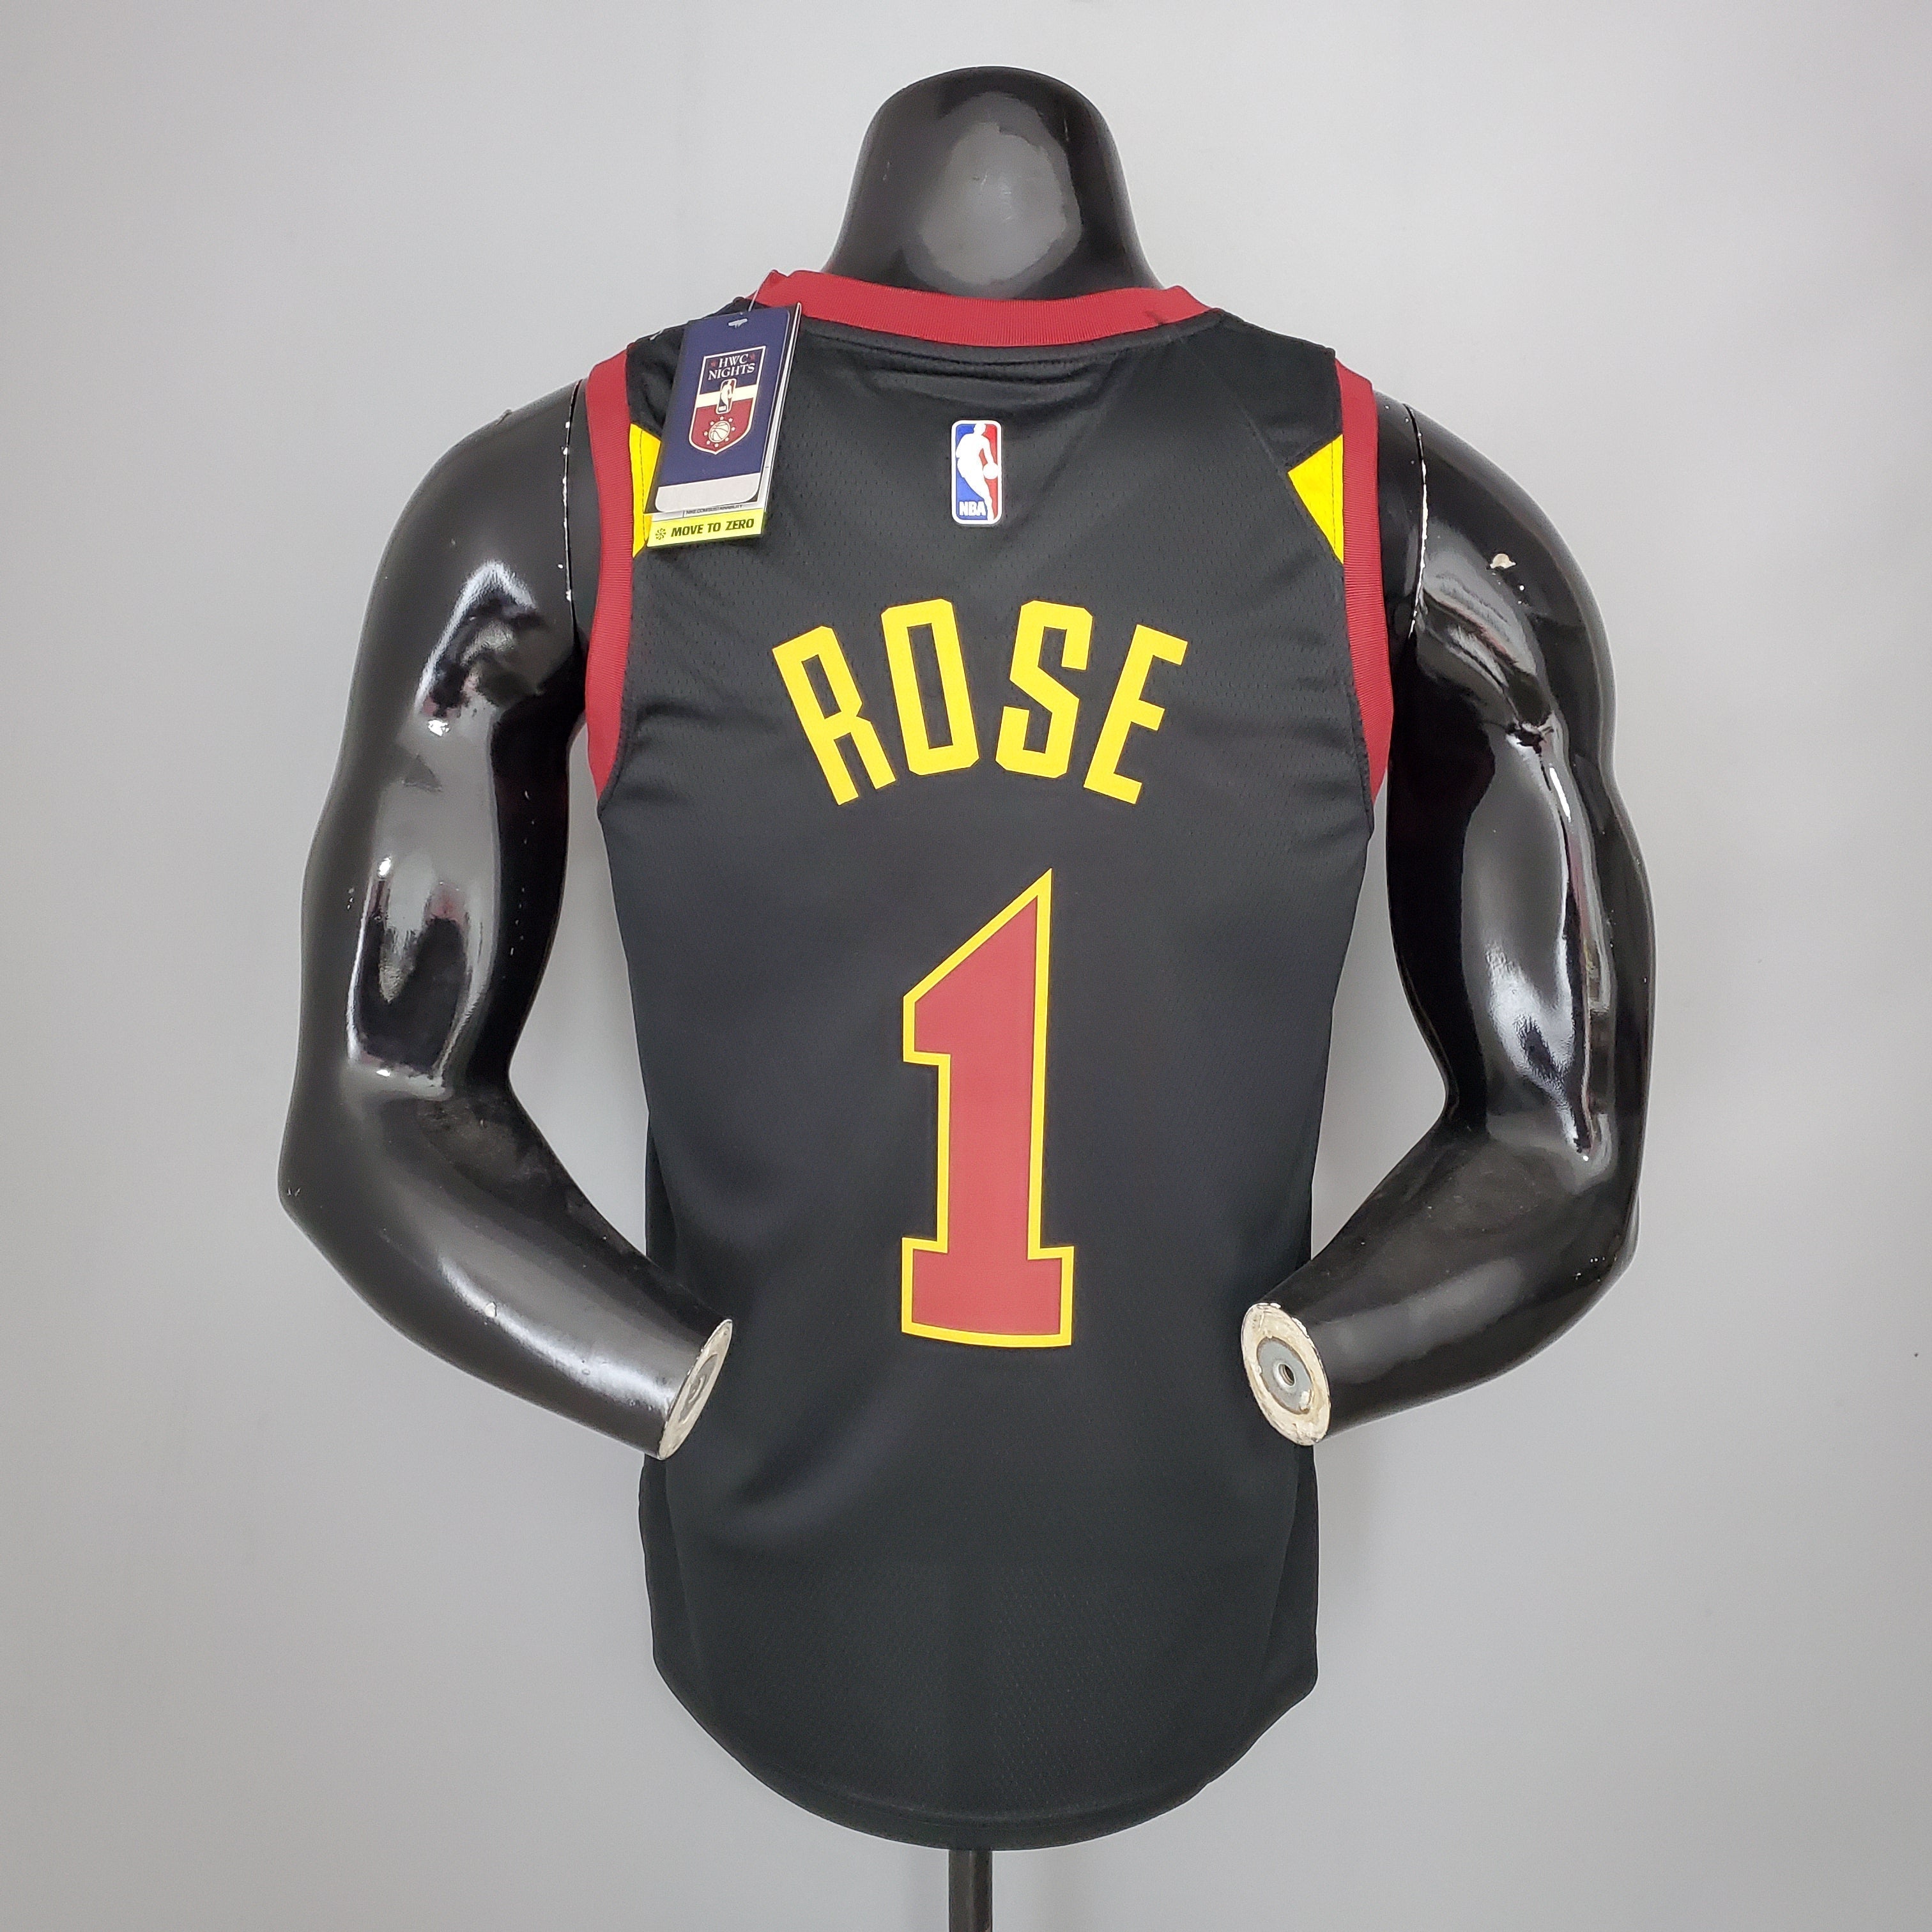 Maillot Cleveland Cavaliers 1 Rose NBA Basket